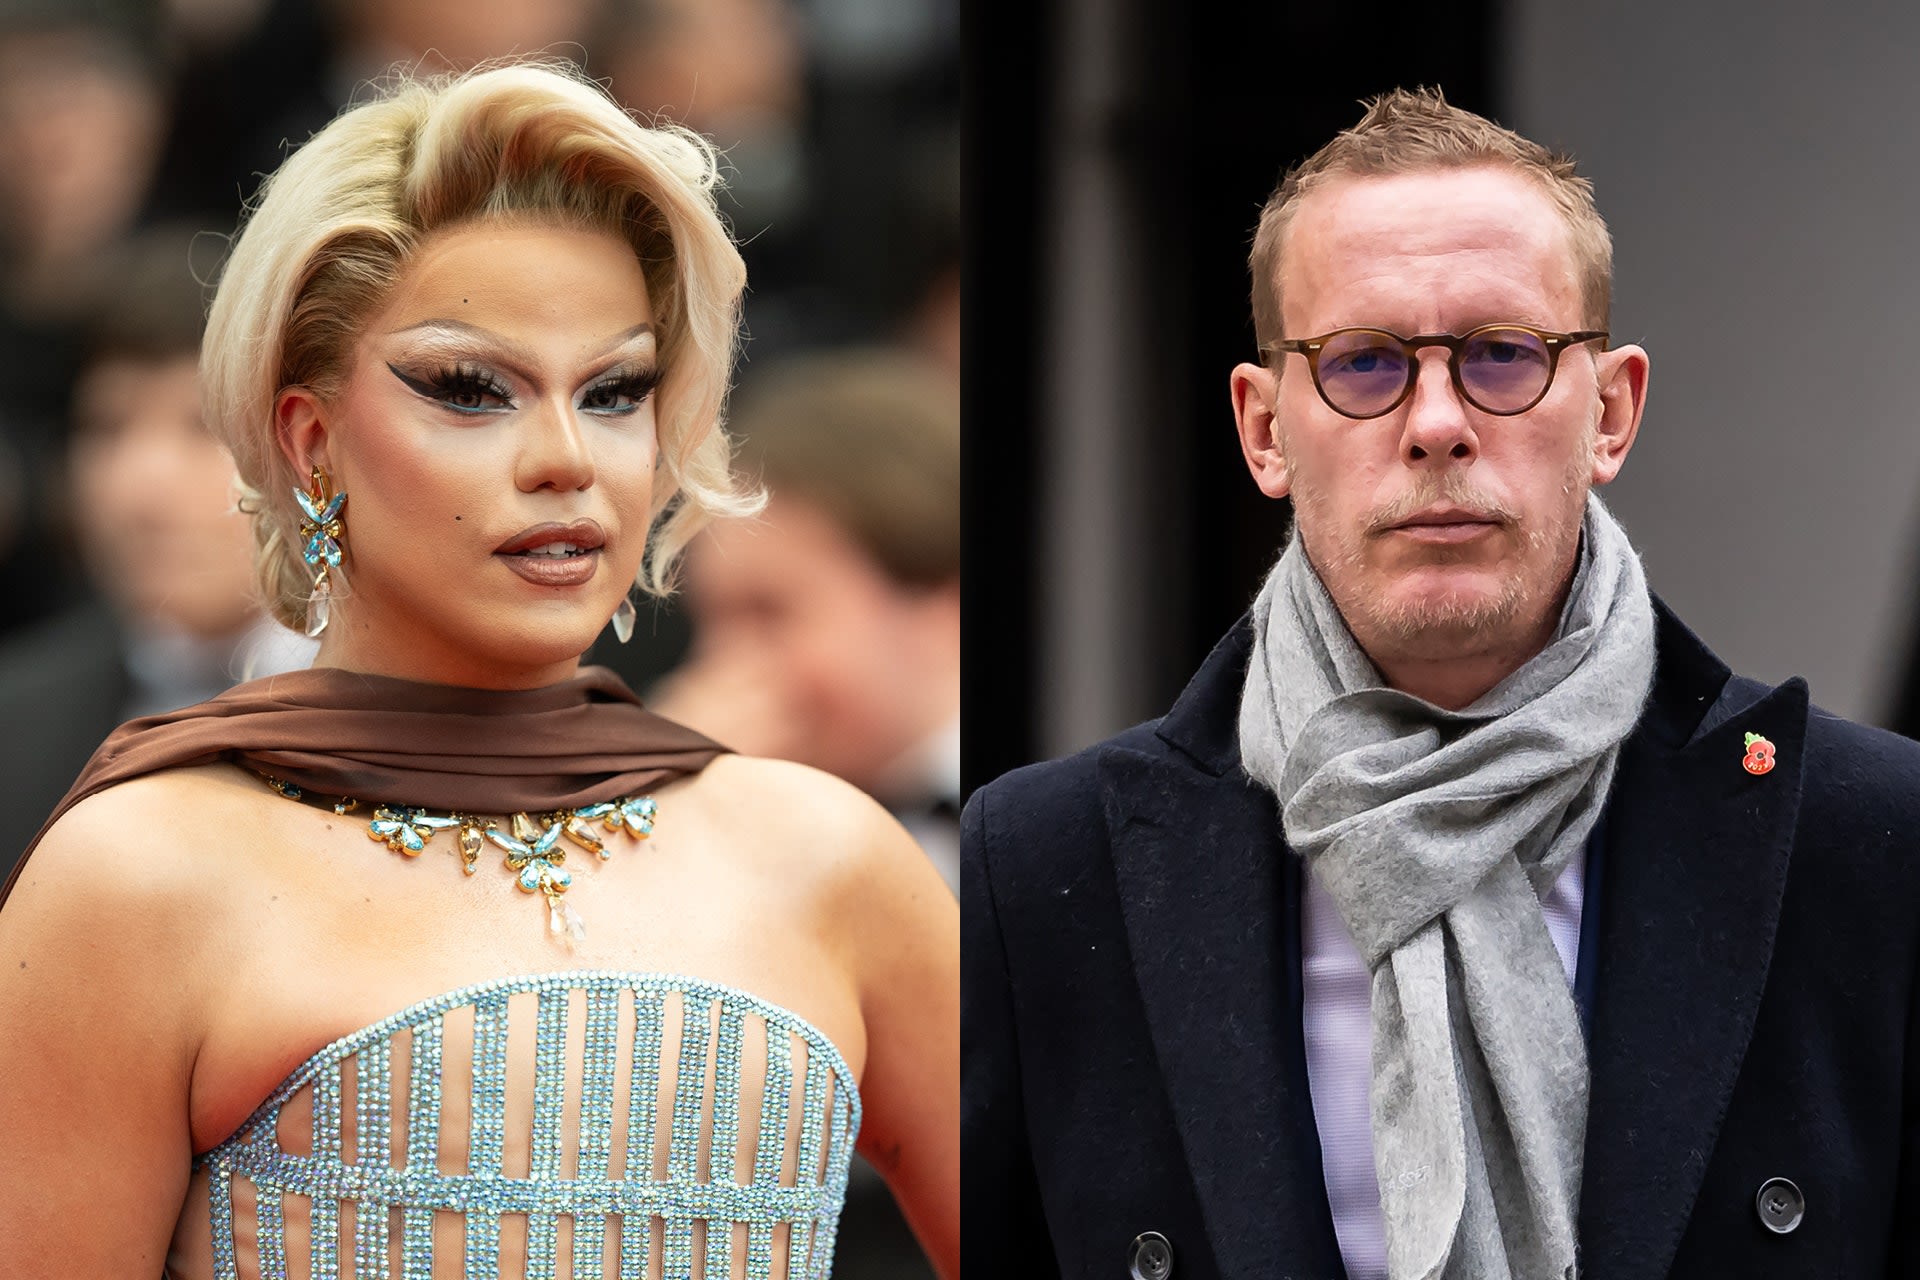 Drag Queen Nicky Doll Is Suing U.K. Actor Laurence Fox Over Olympics “Pedos” Comment